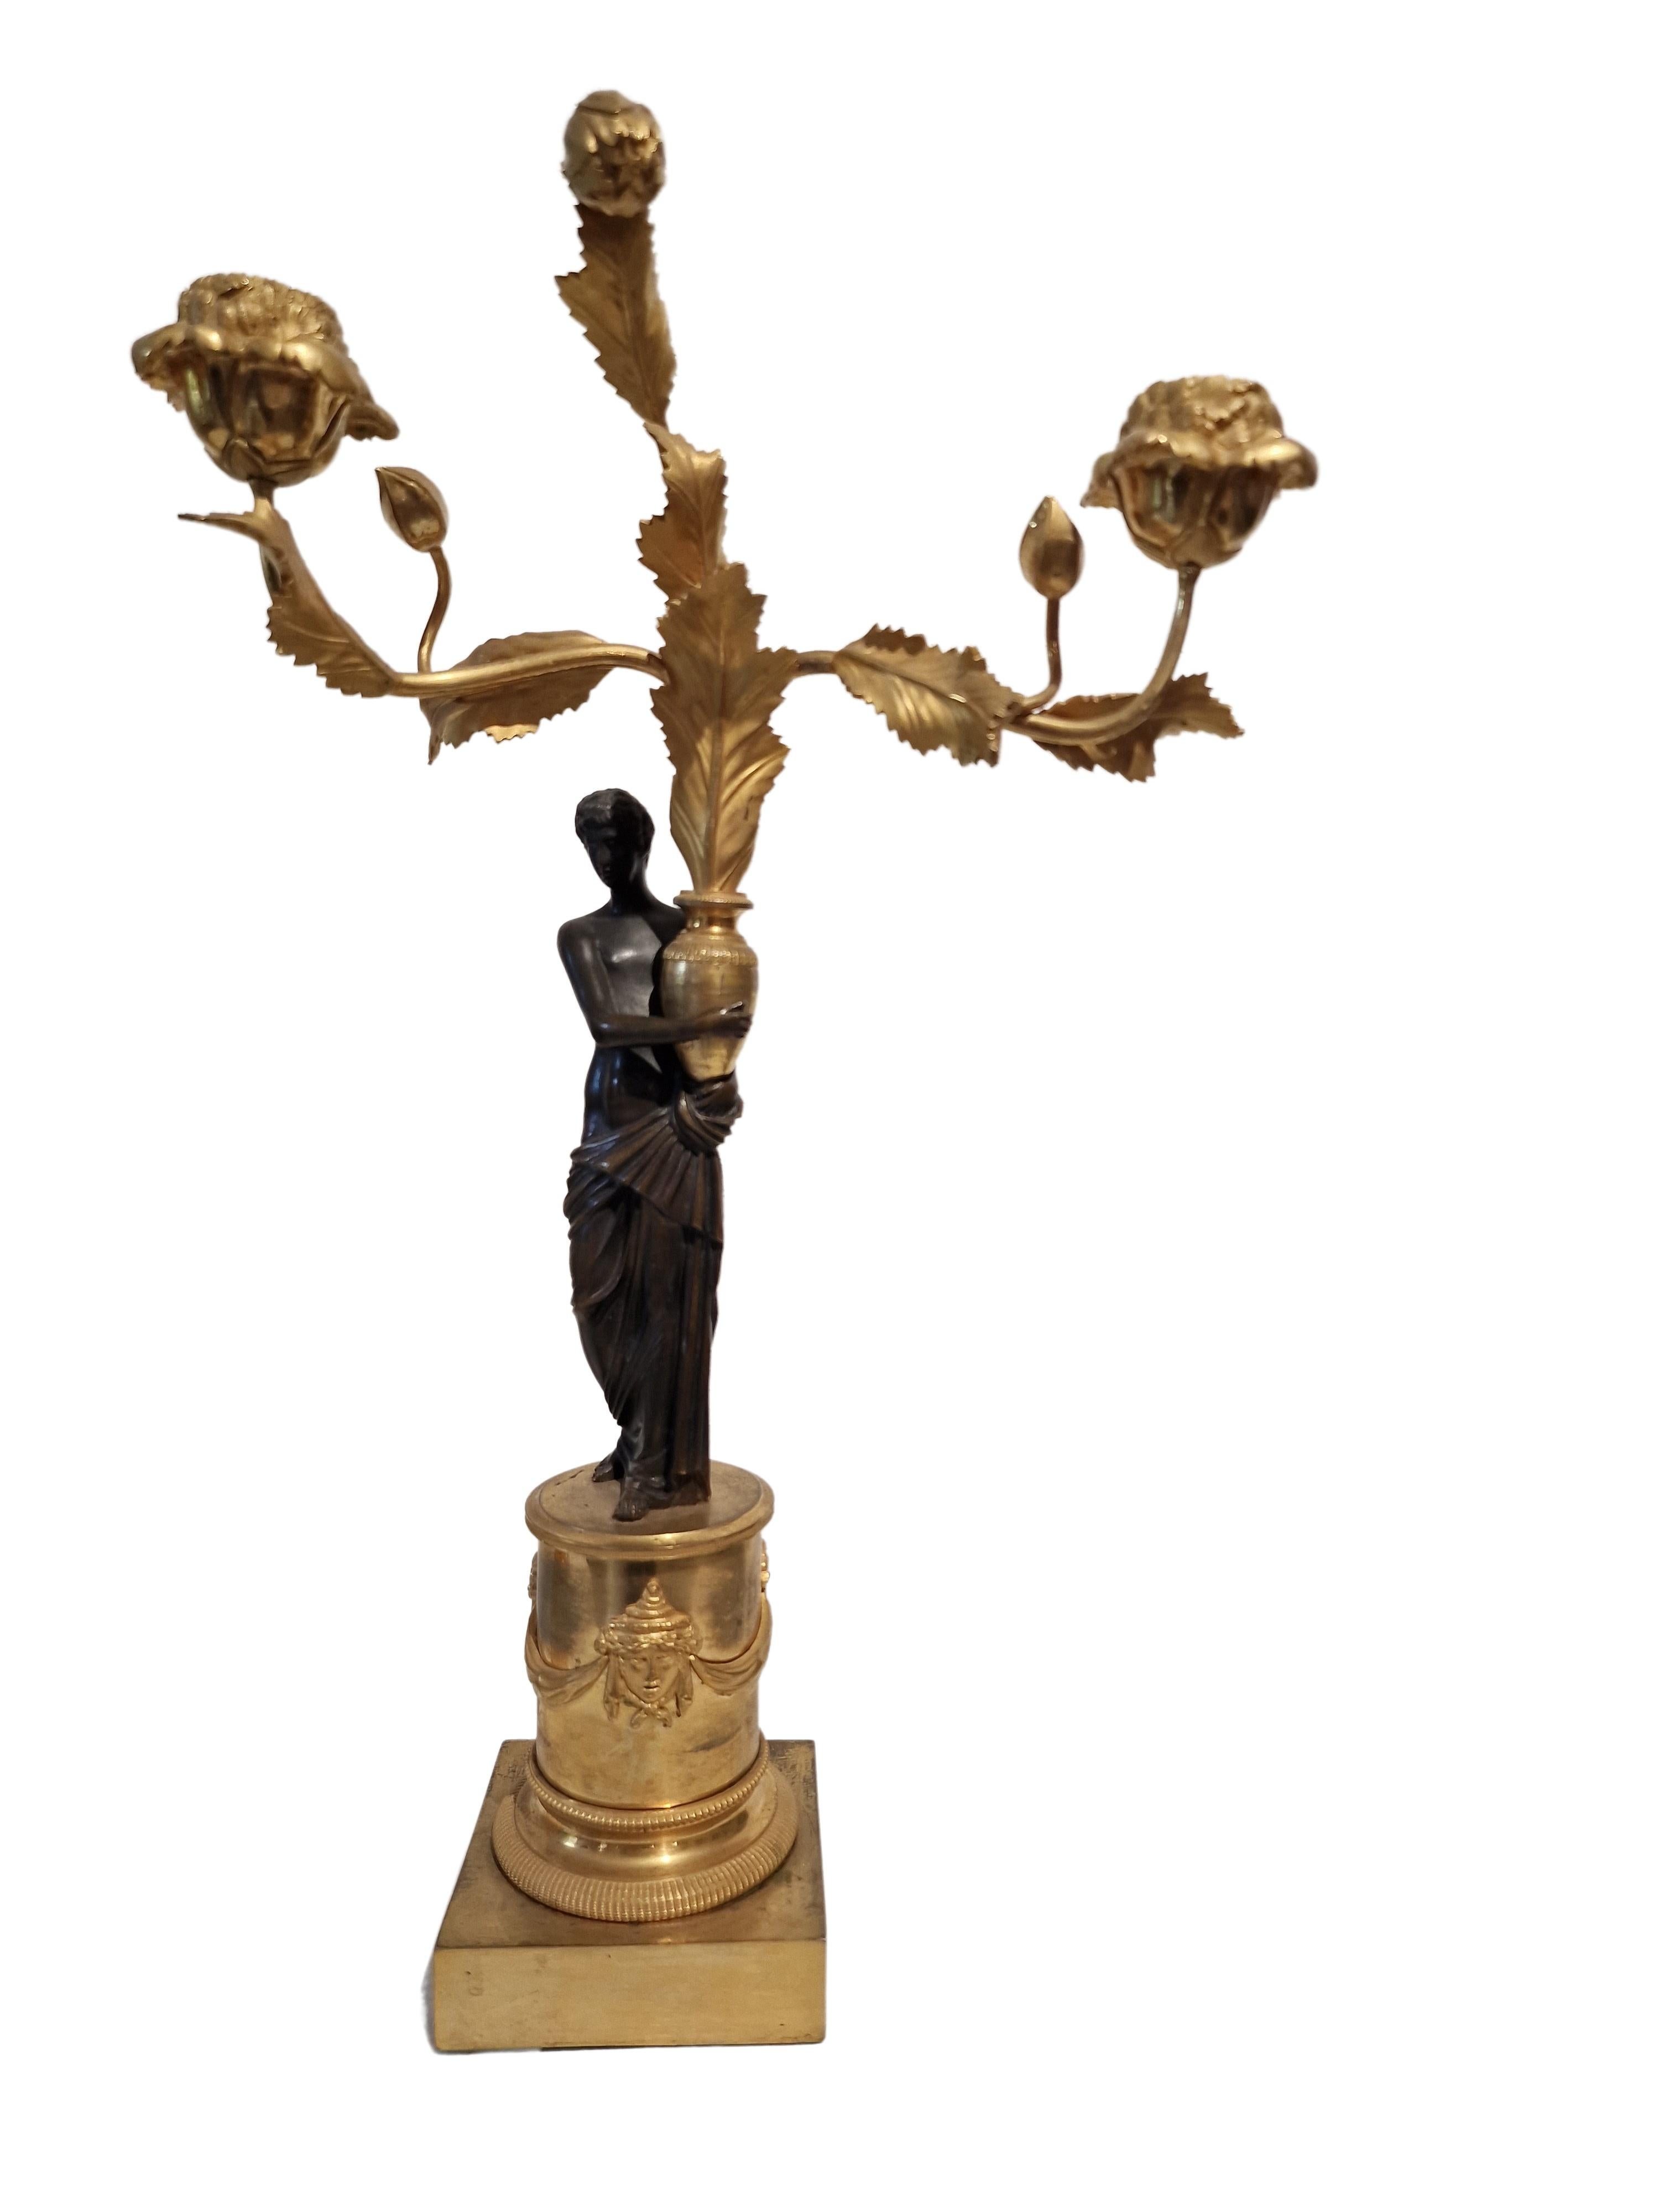 French Pair of Girandoles, Candle sticks, Candelabras, bronze, ~ 1810 Empire, France For Sale